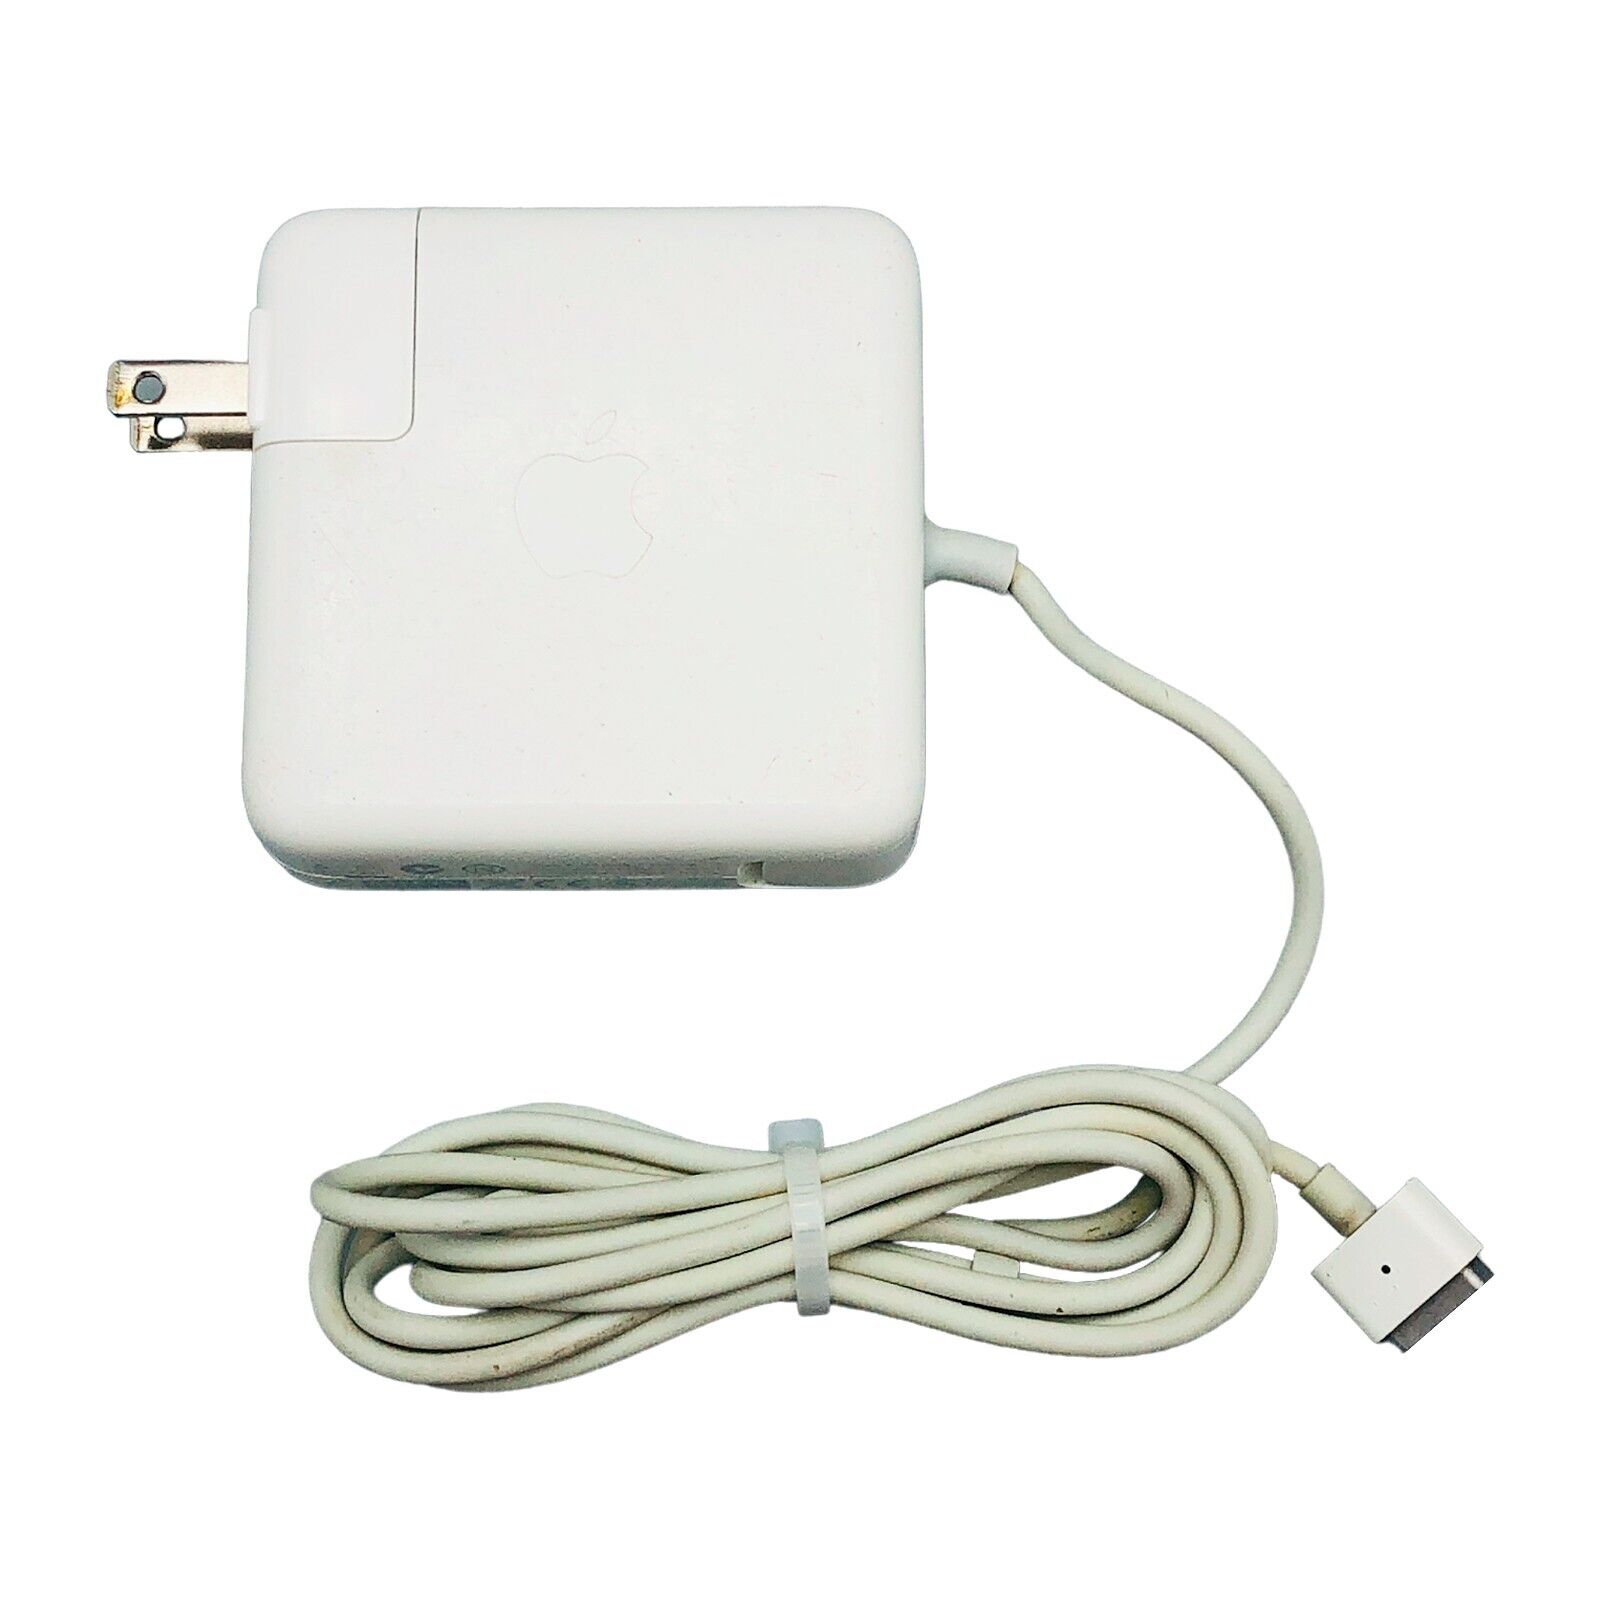 Genuine Original Apple MacBook Pro A1278 A1286 Charger MagSafe1 Power Adapter